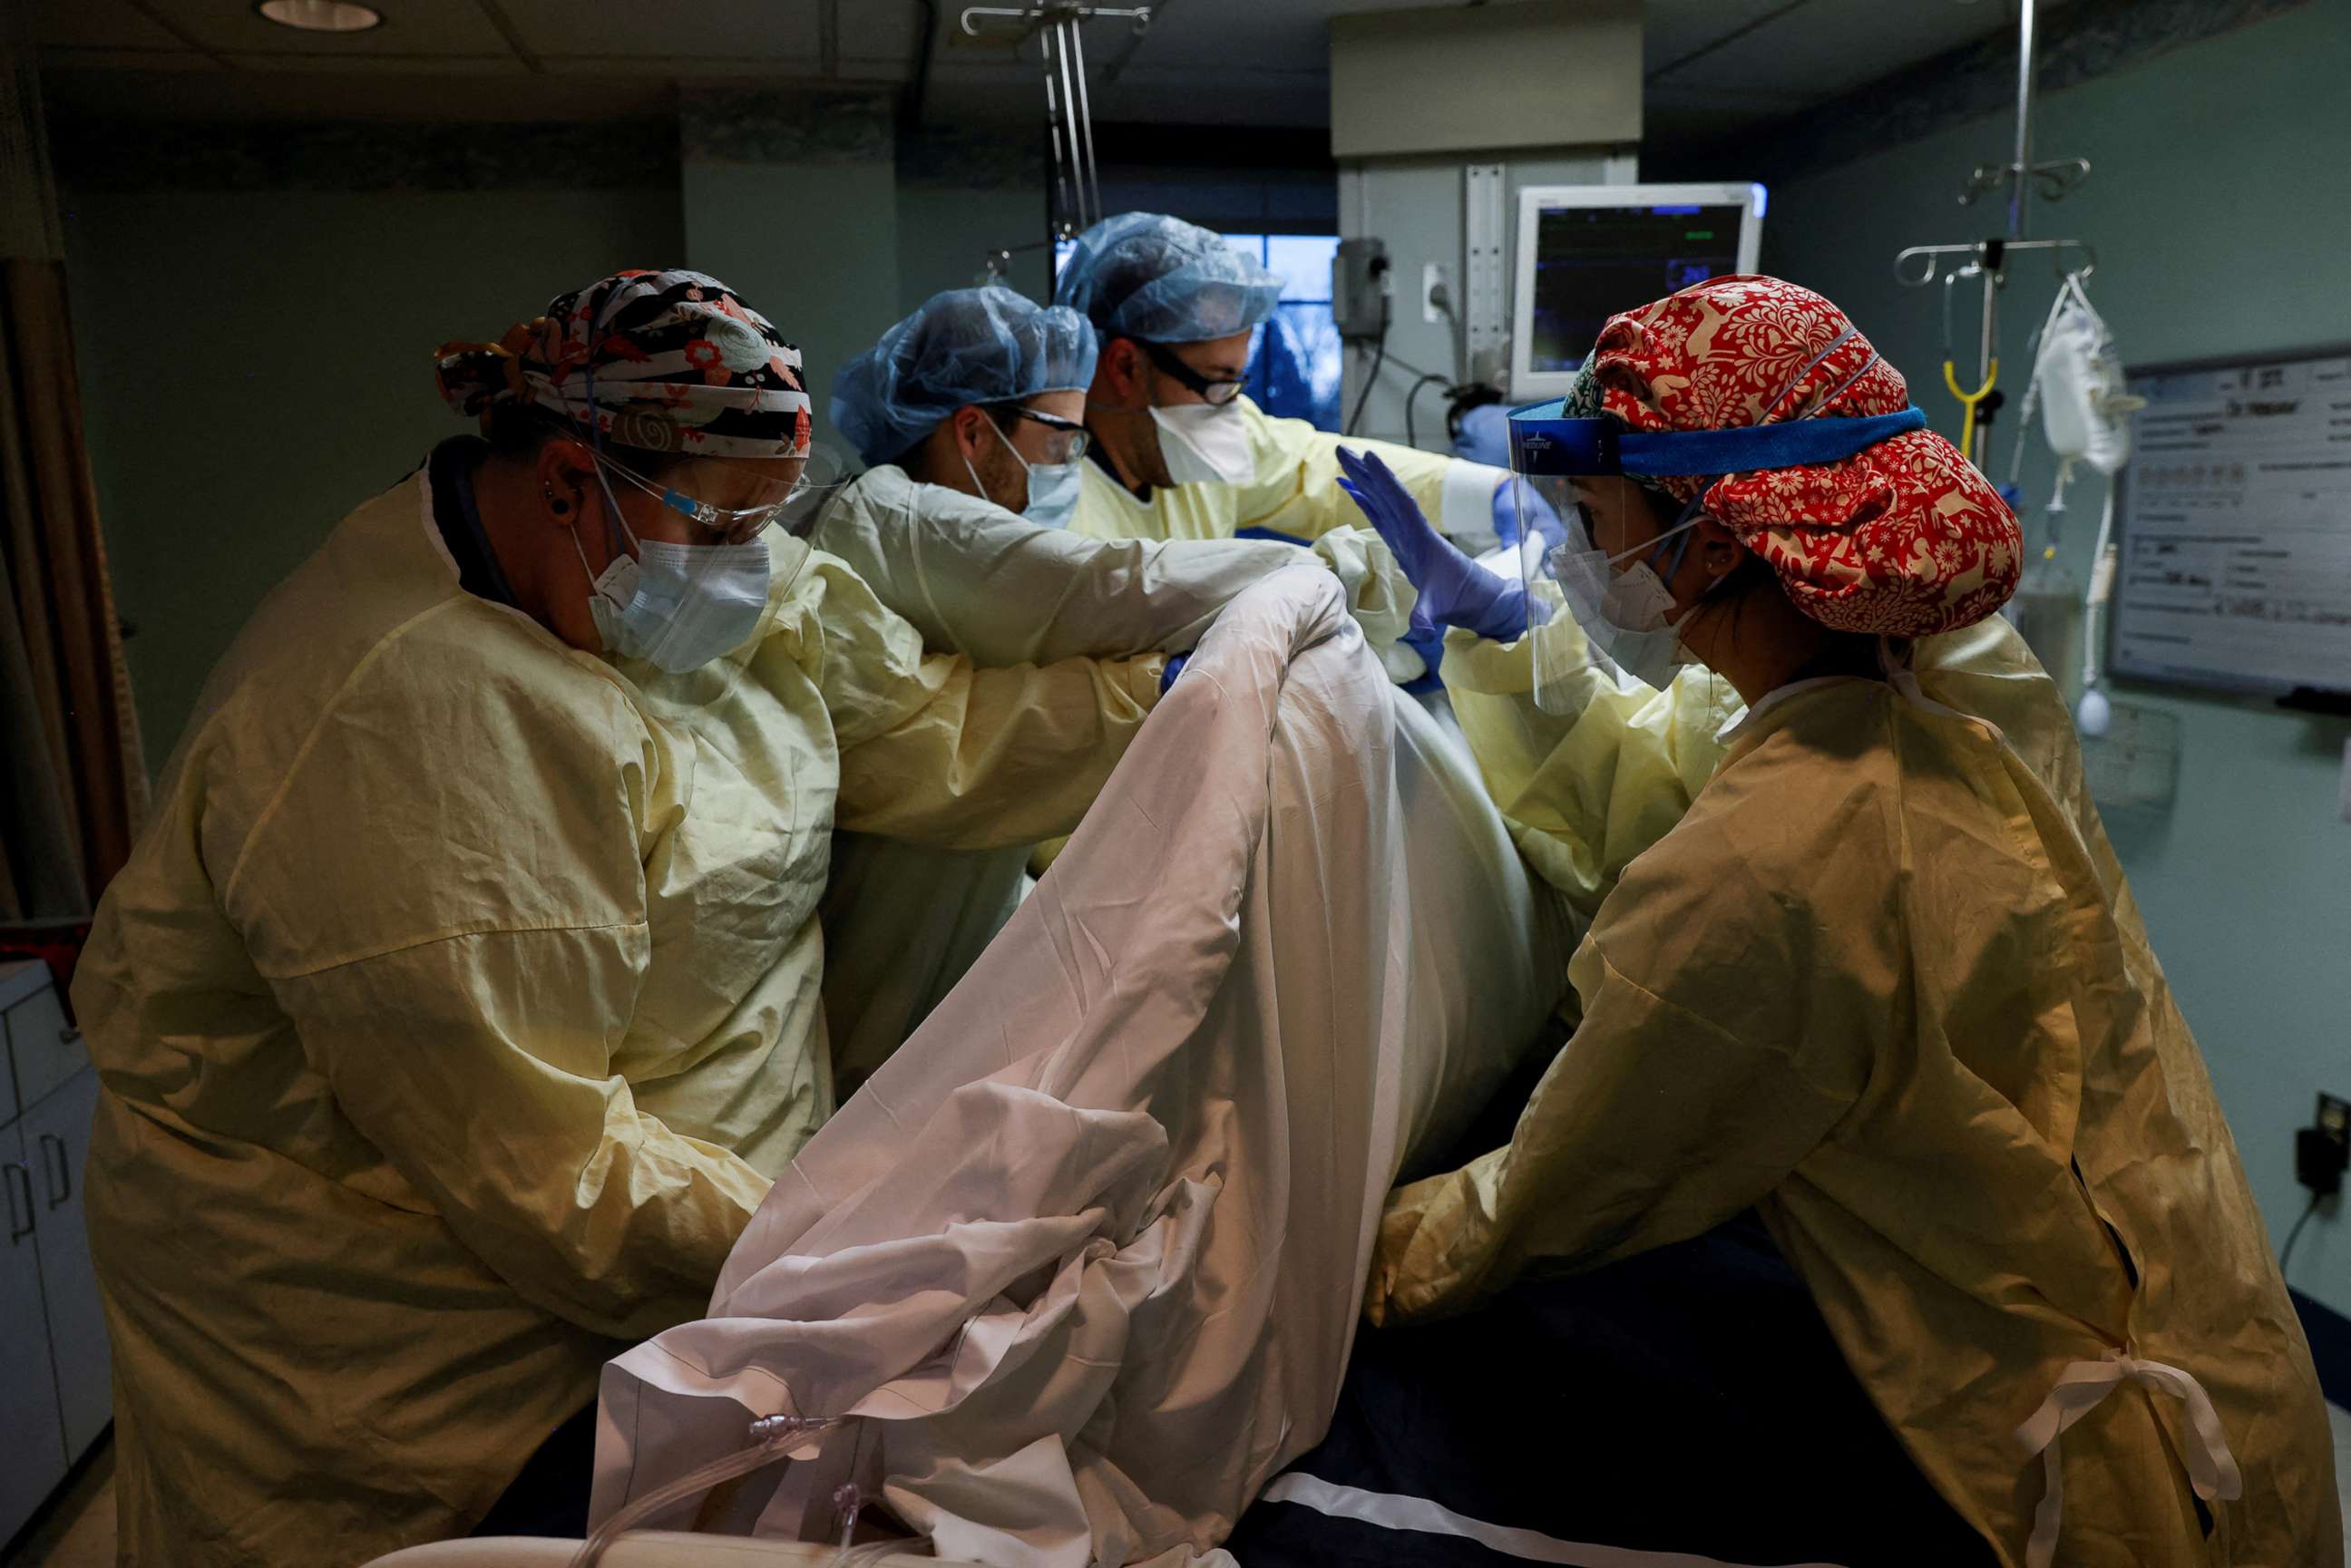 PHOTO: Medical staff treat a COVID-19 patient in their isolation room on the Intensive Care Unit (ICU) at Western Reserve Hospital in Cuyahoga Falls, Ohio, Jan. 4, 2022. 